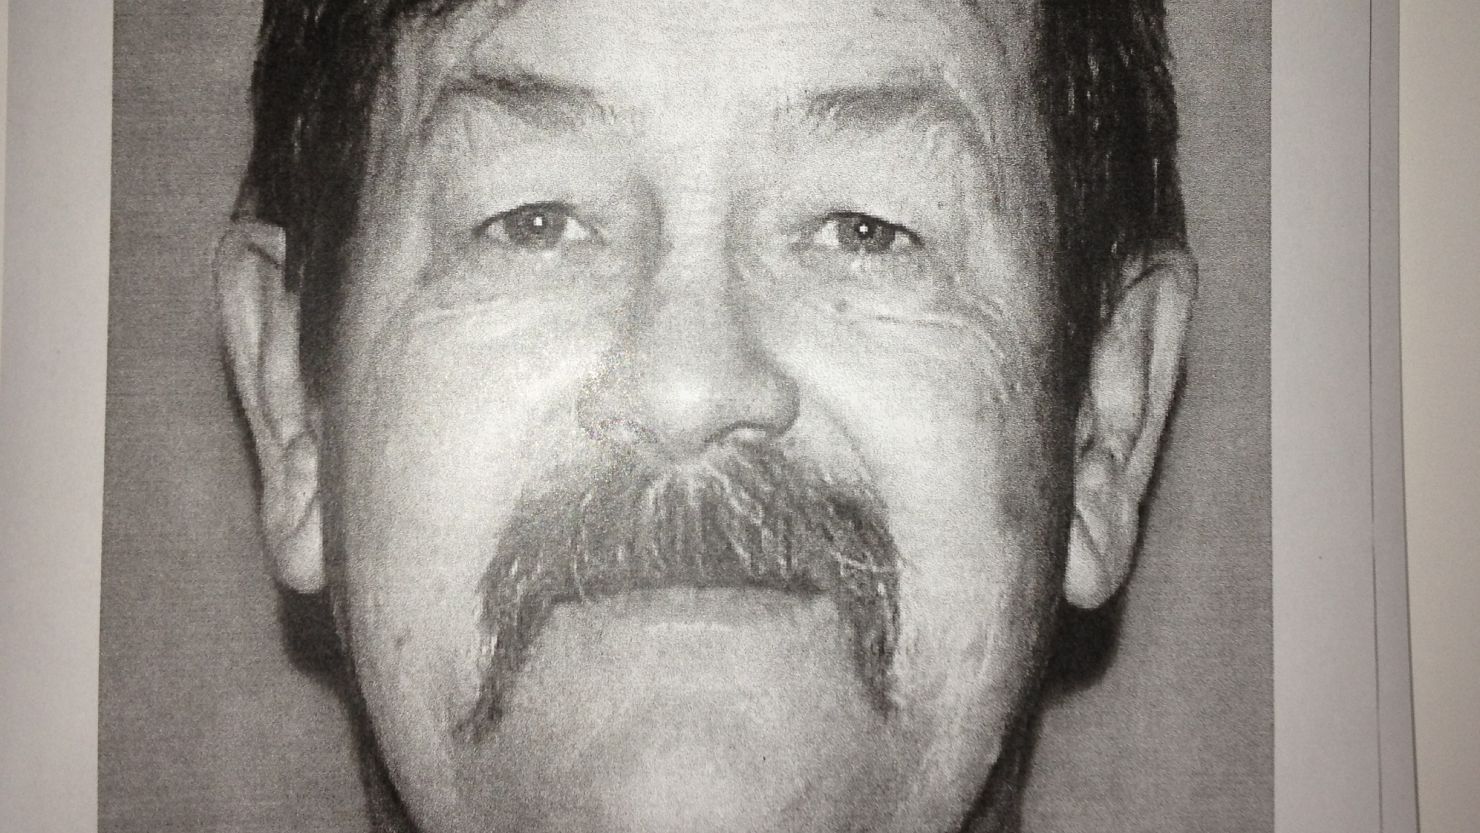 Kenneth James Bailey Jr, 59, from New Castle, Indiana, died from a self inflicted gunshot wound after a police shootout on Thursday in Pendleton, Indiana.